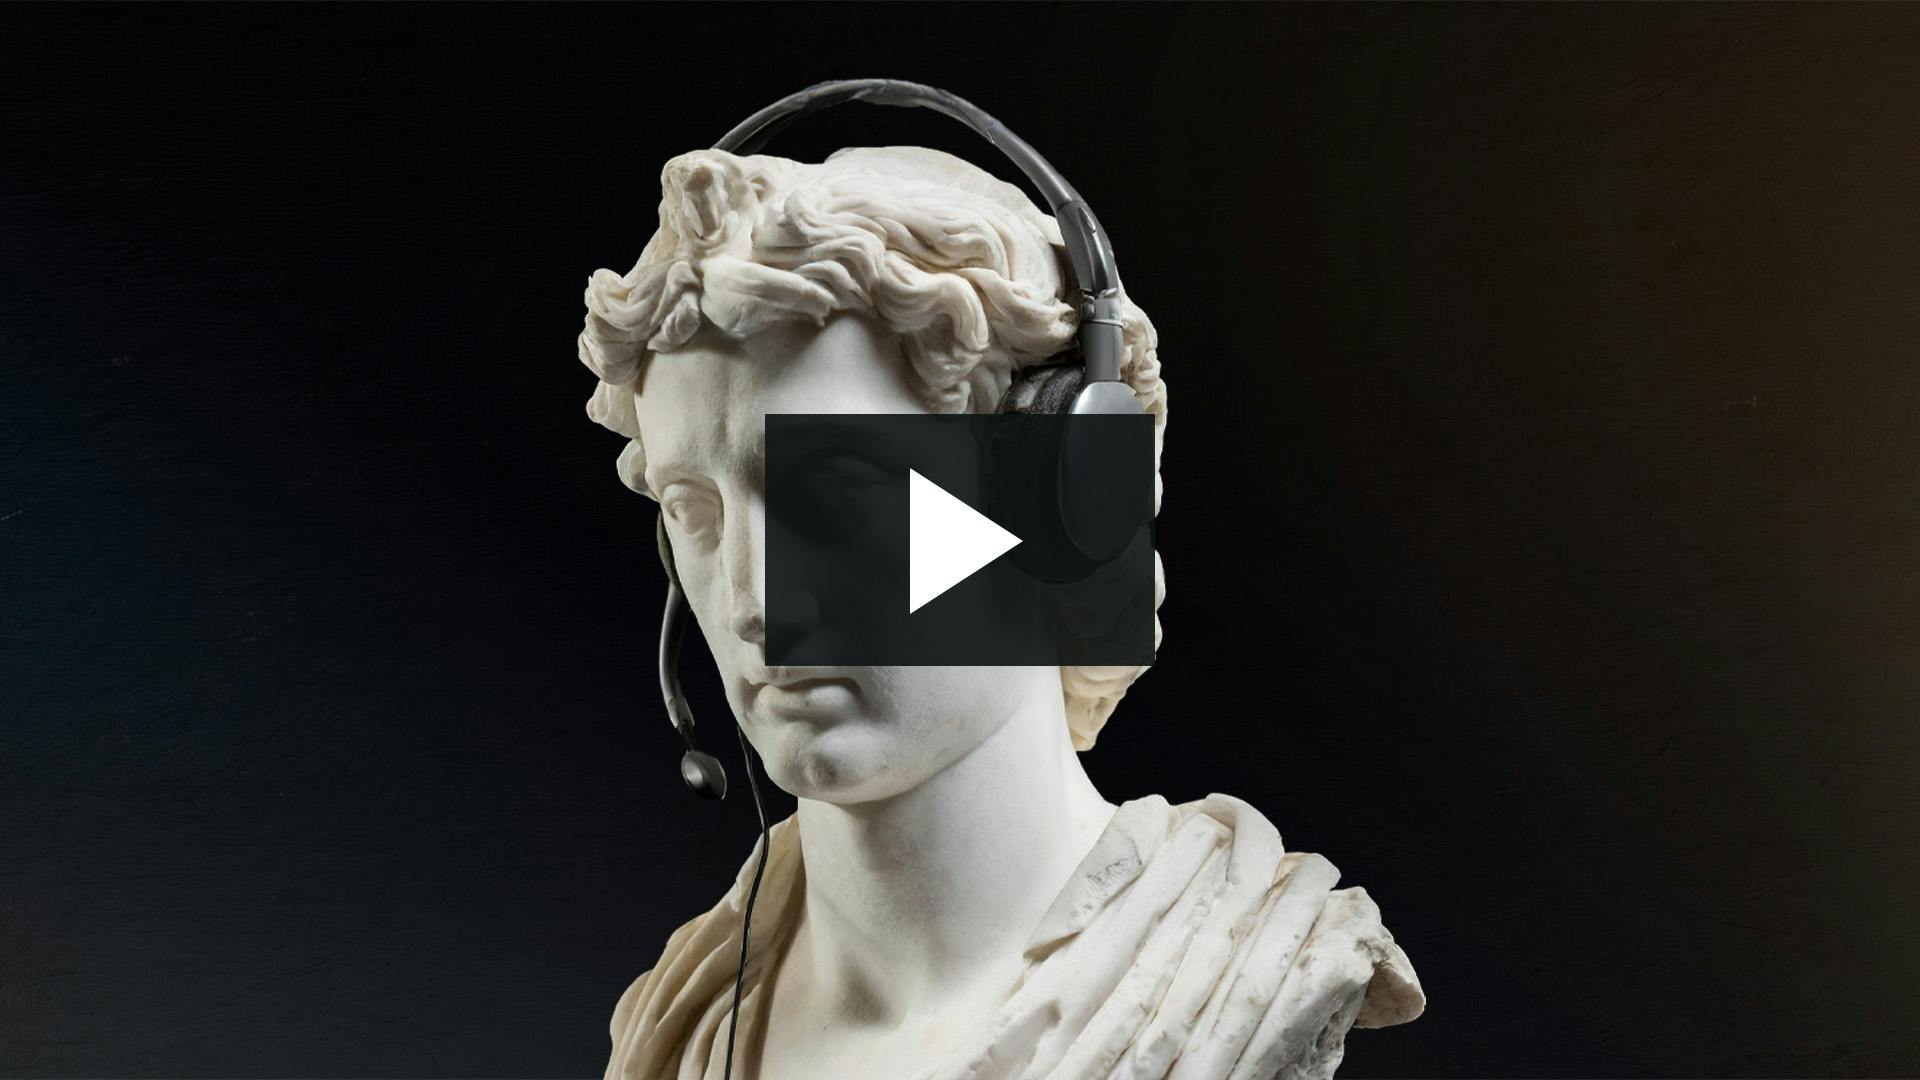 Roman bust with headset on